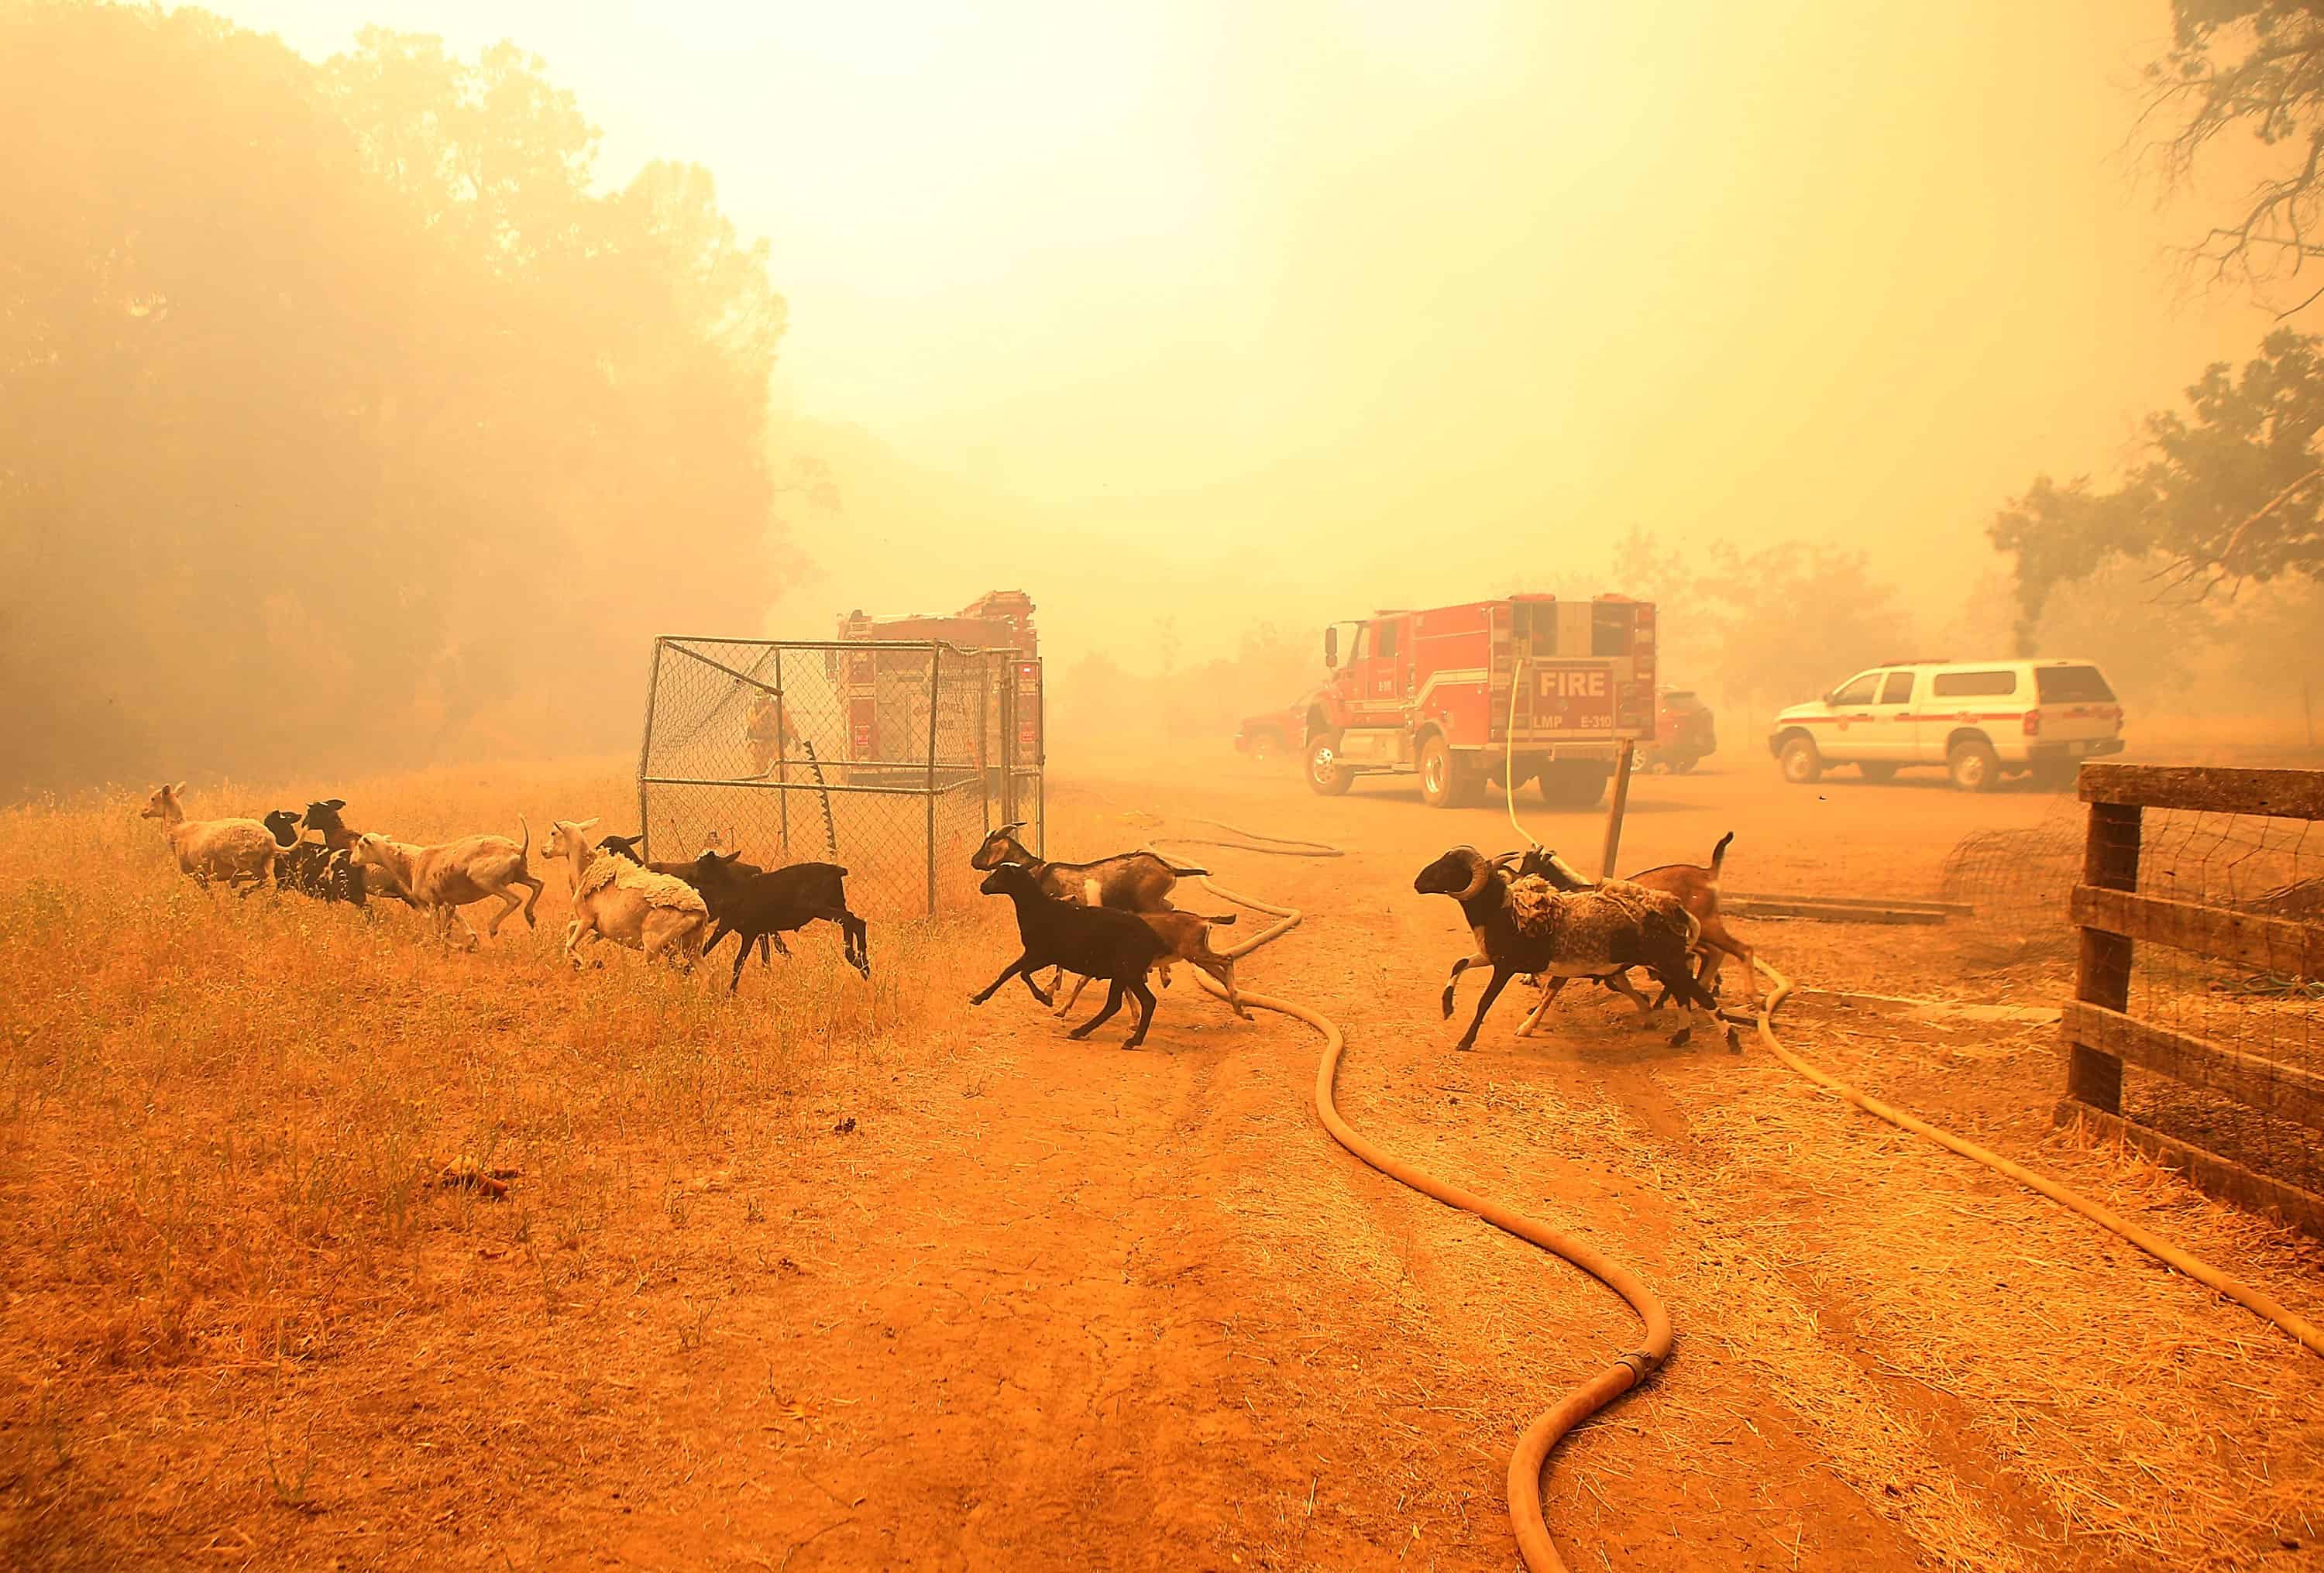 Goats run away from their pen after firefighters freed them as the Rocky Fire approaches.